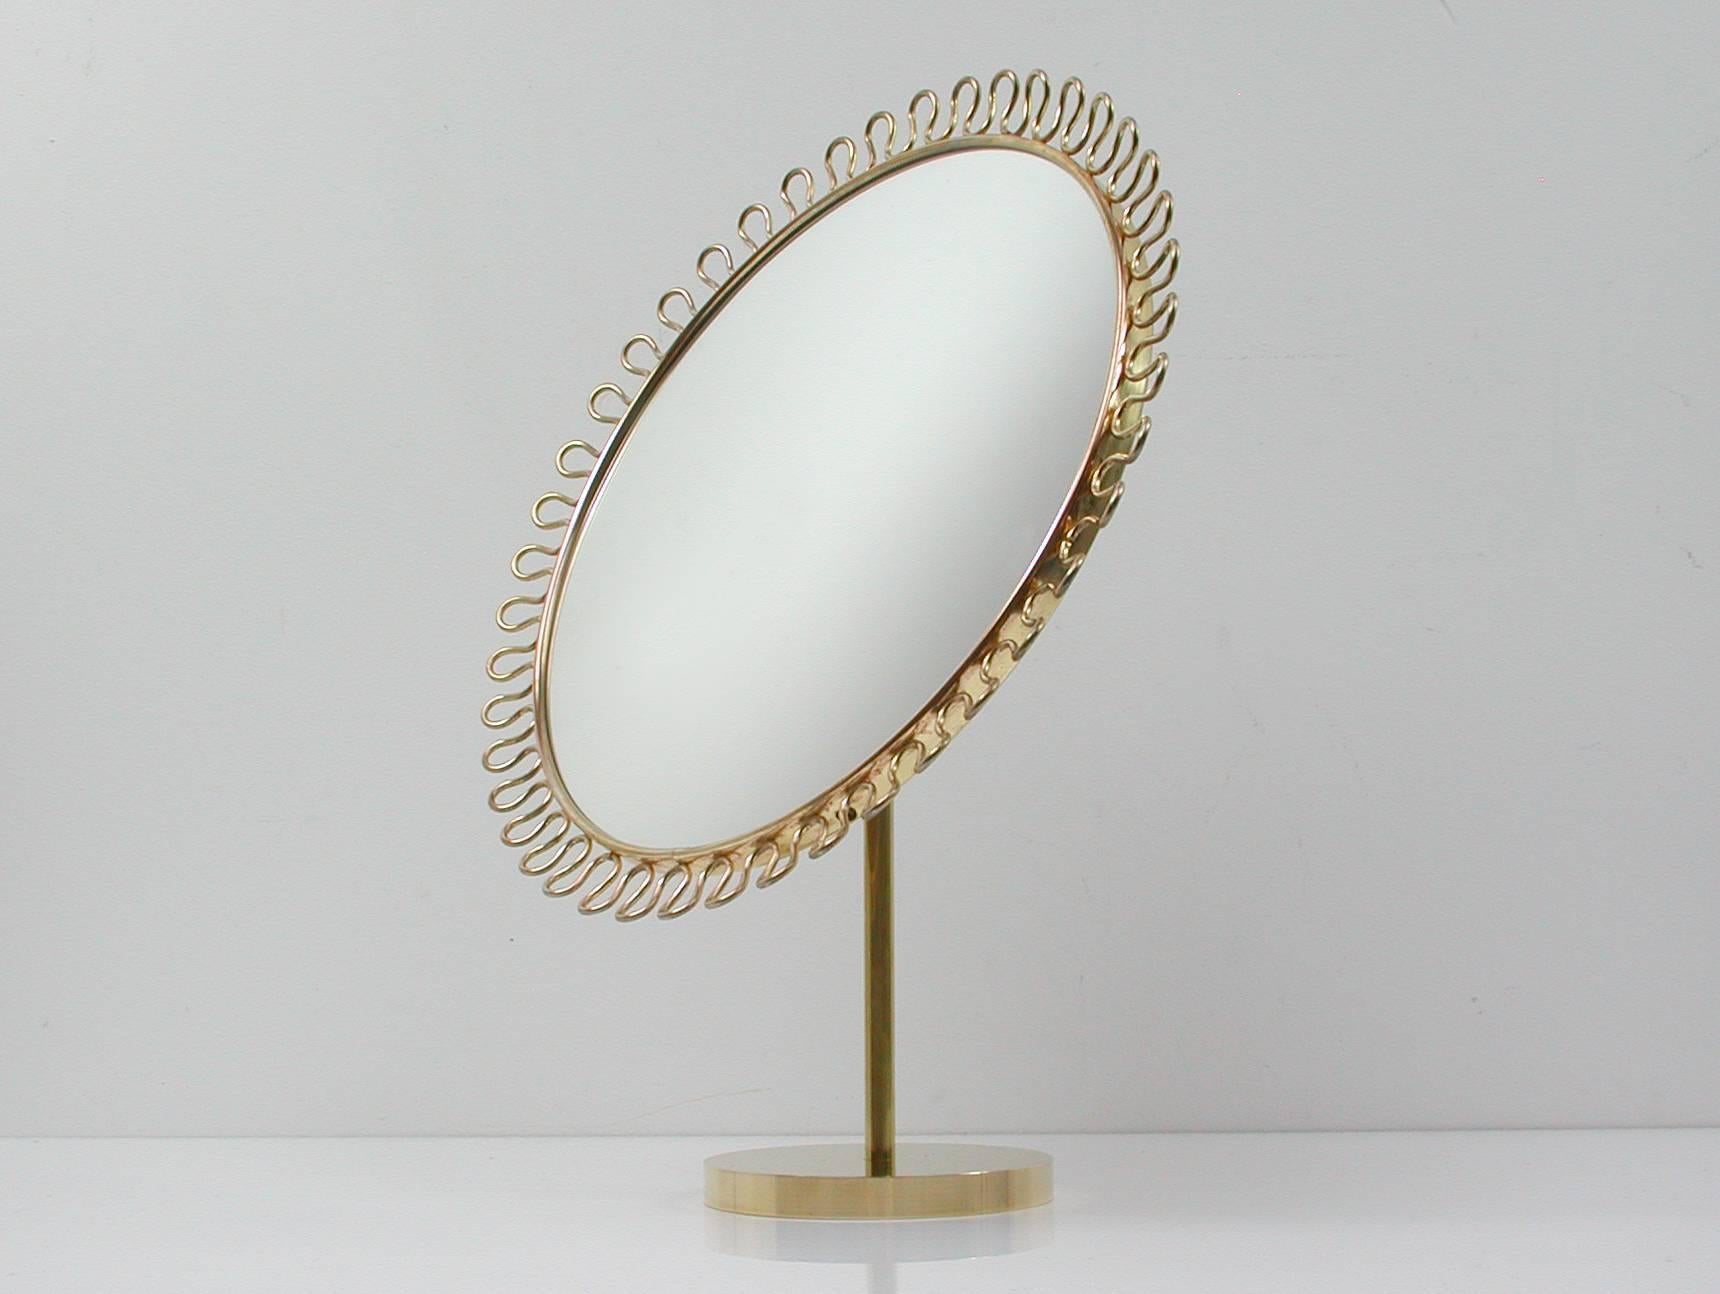 Beautiful sculptural brass-plated loop table mirror with adjustable mirror and wooden rear on bronze base in the manner of Josef Frank for Svenskt Tenn, Sweden, 1950s.
In excellent condition both brass and mirror with nice warm patina.